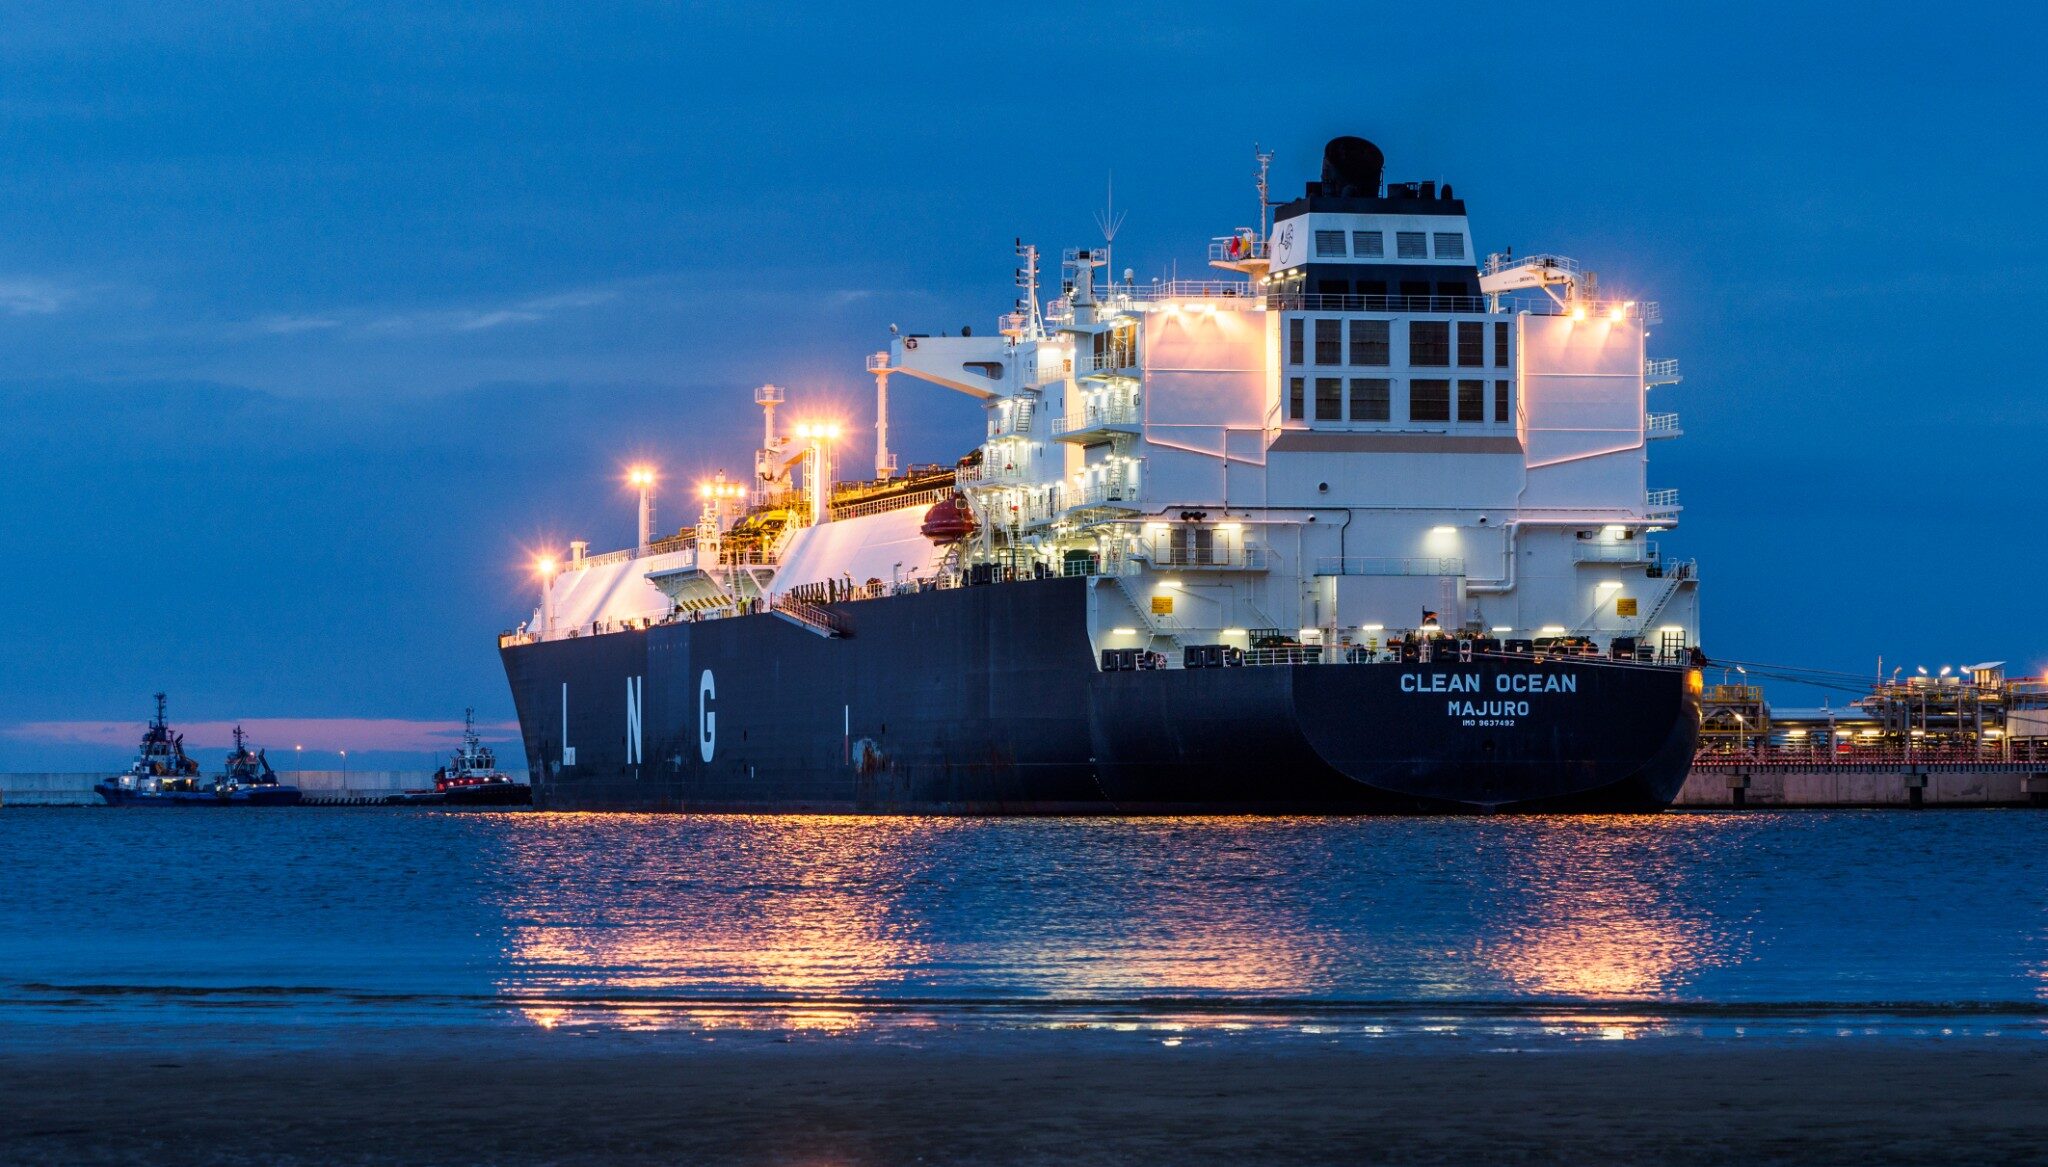 LNG Tanker Clean Ocean sailing out of an American port. Image credit Maciej Margas.